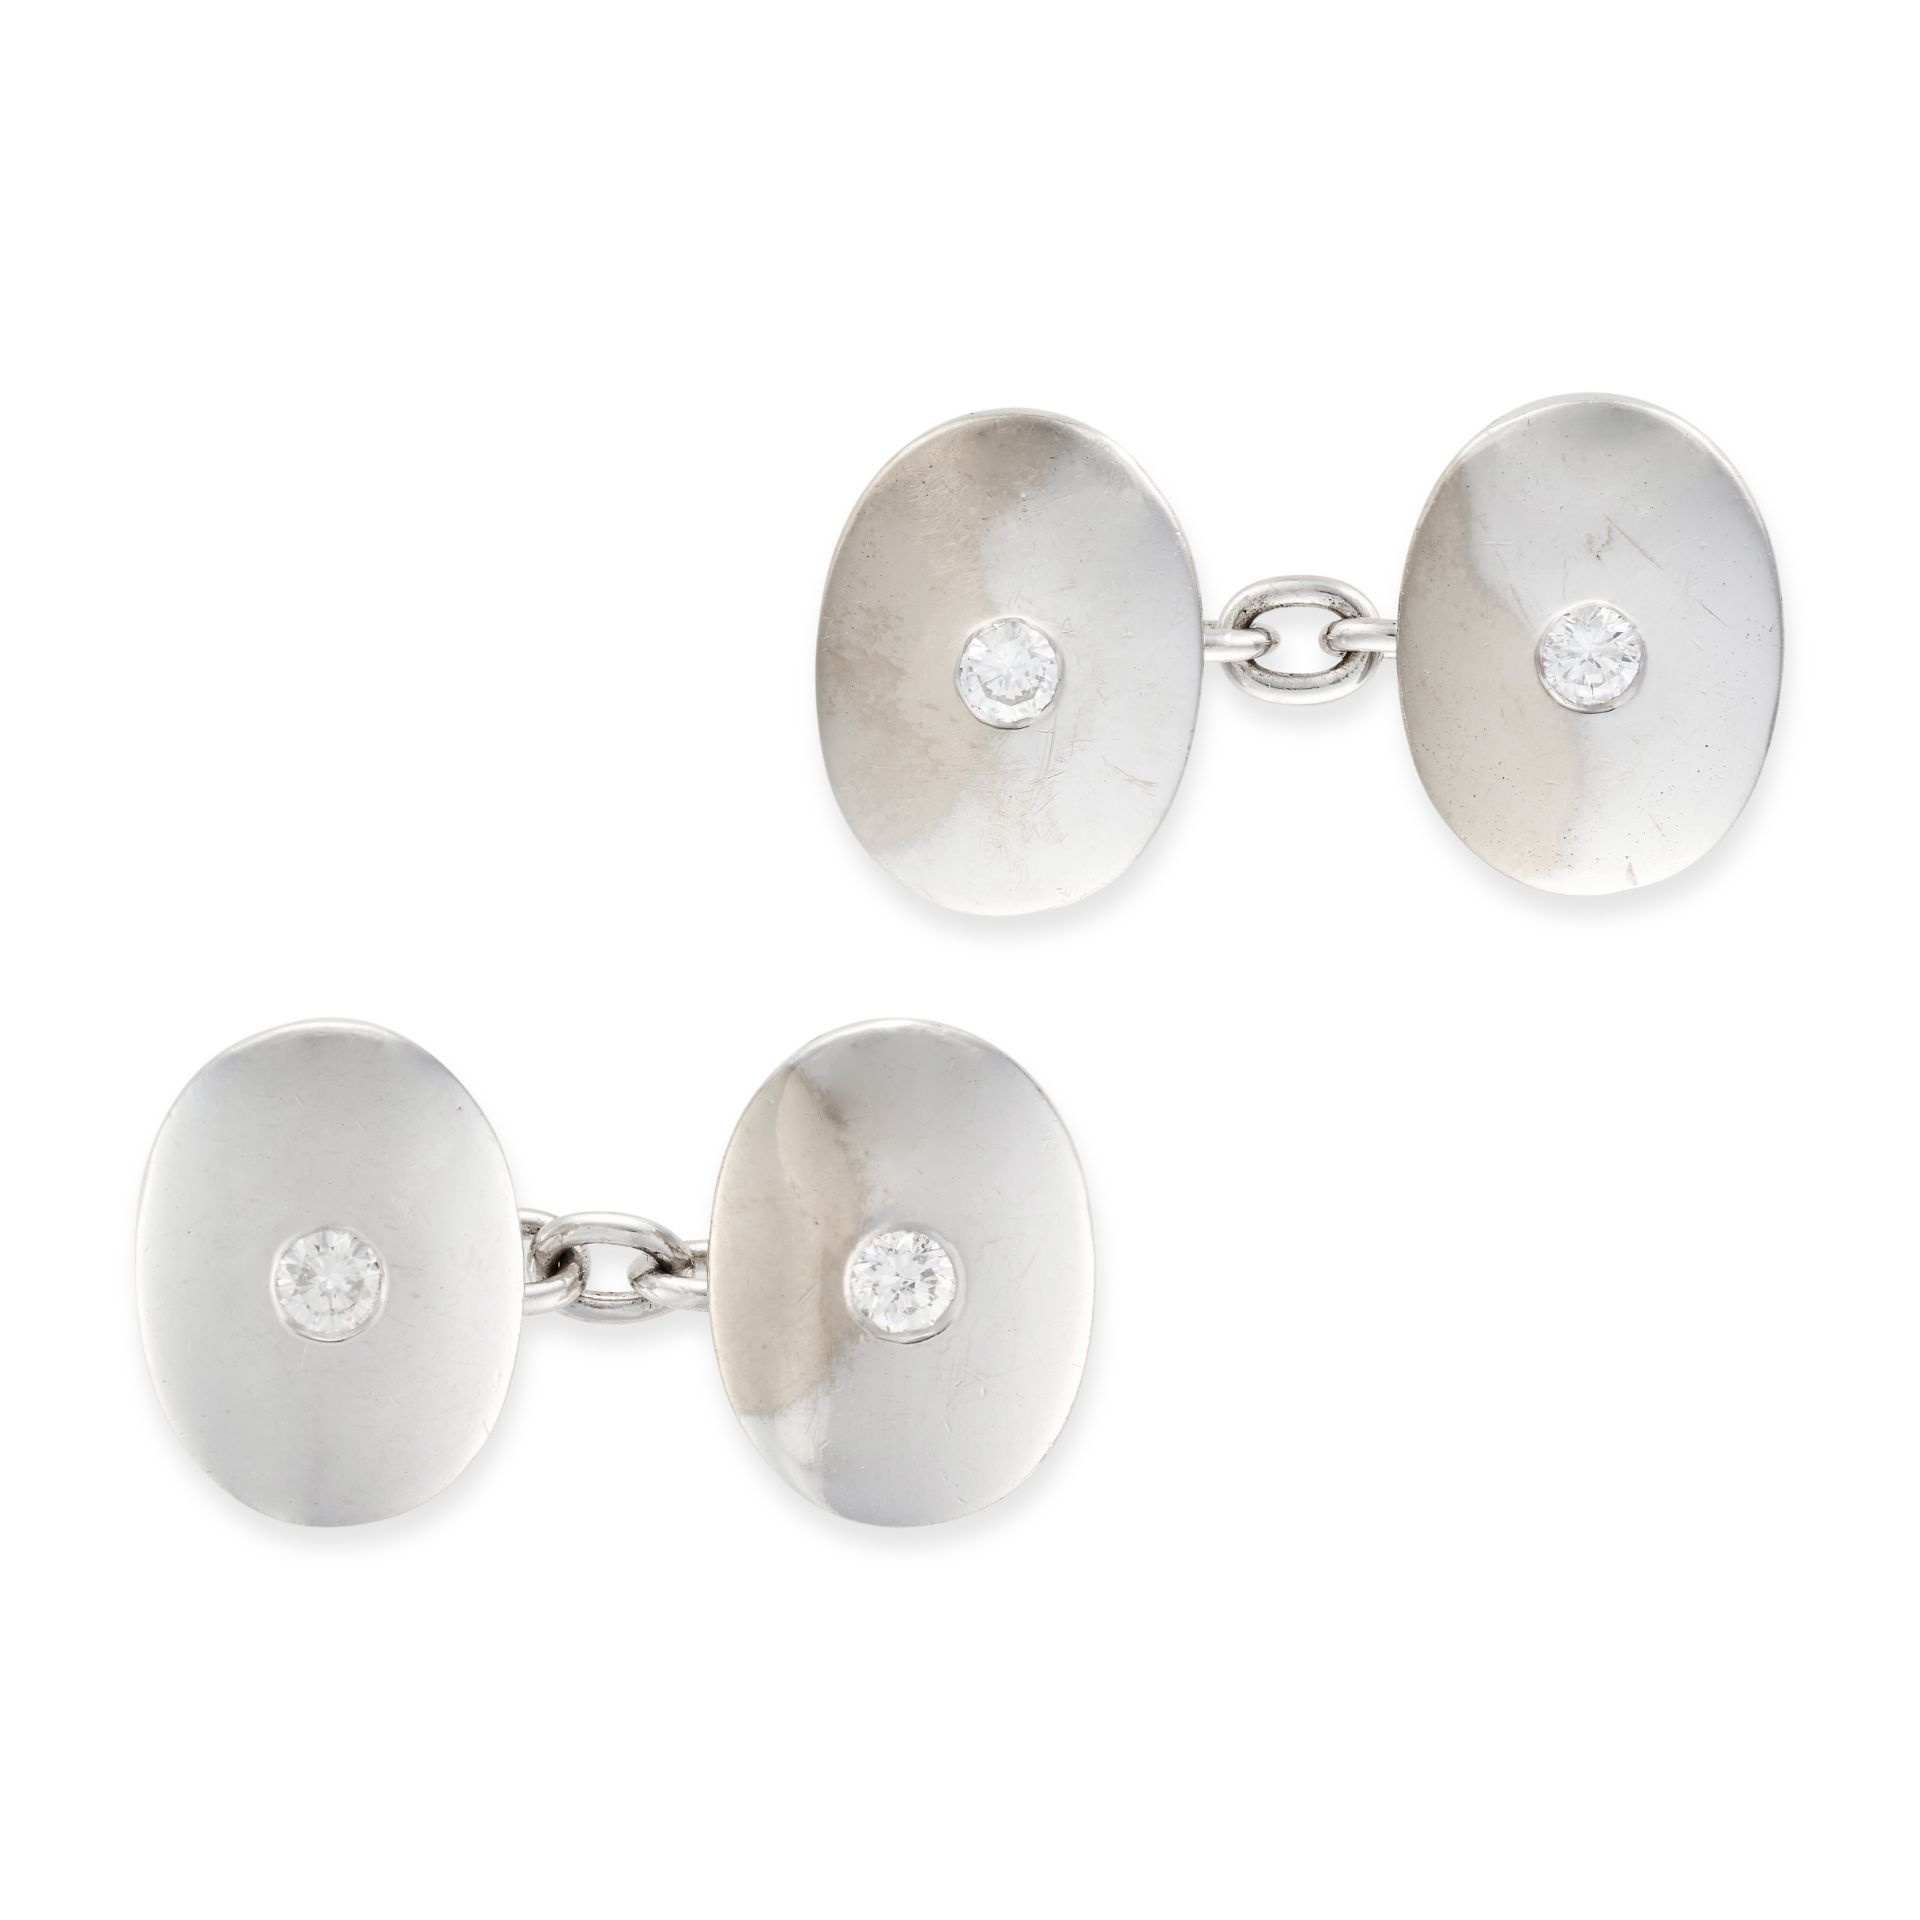 A PAIR OF DIAMOND CUFFLINKS each oval link set with a round brilliant cut diamond, stamped 18, ea...